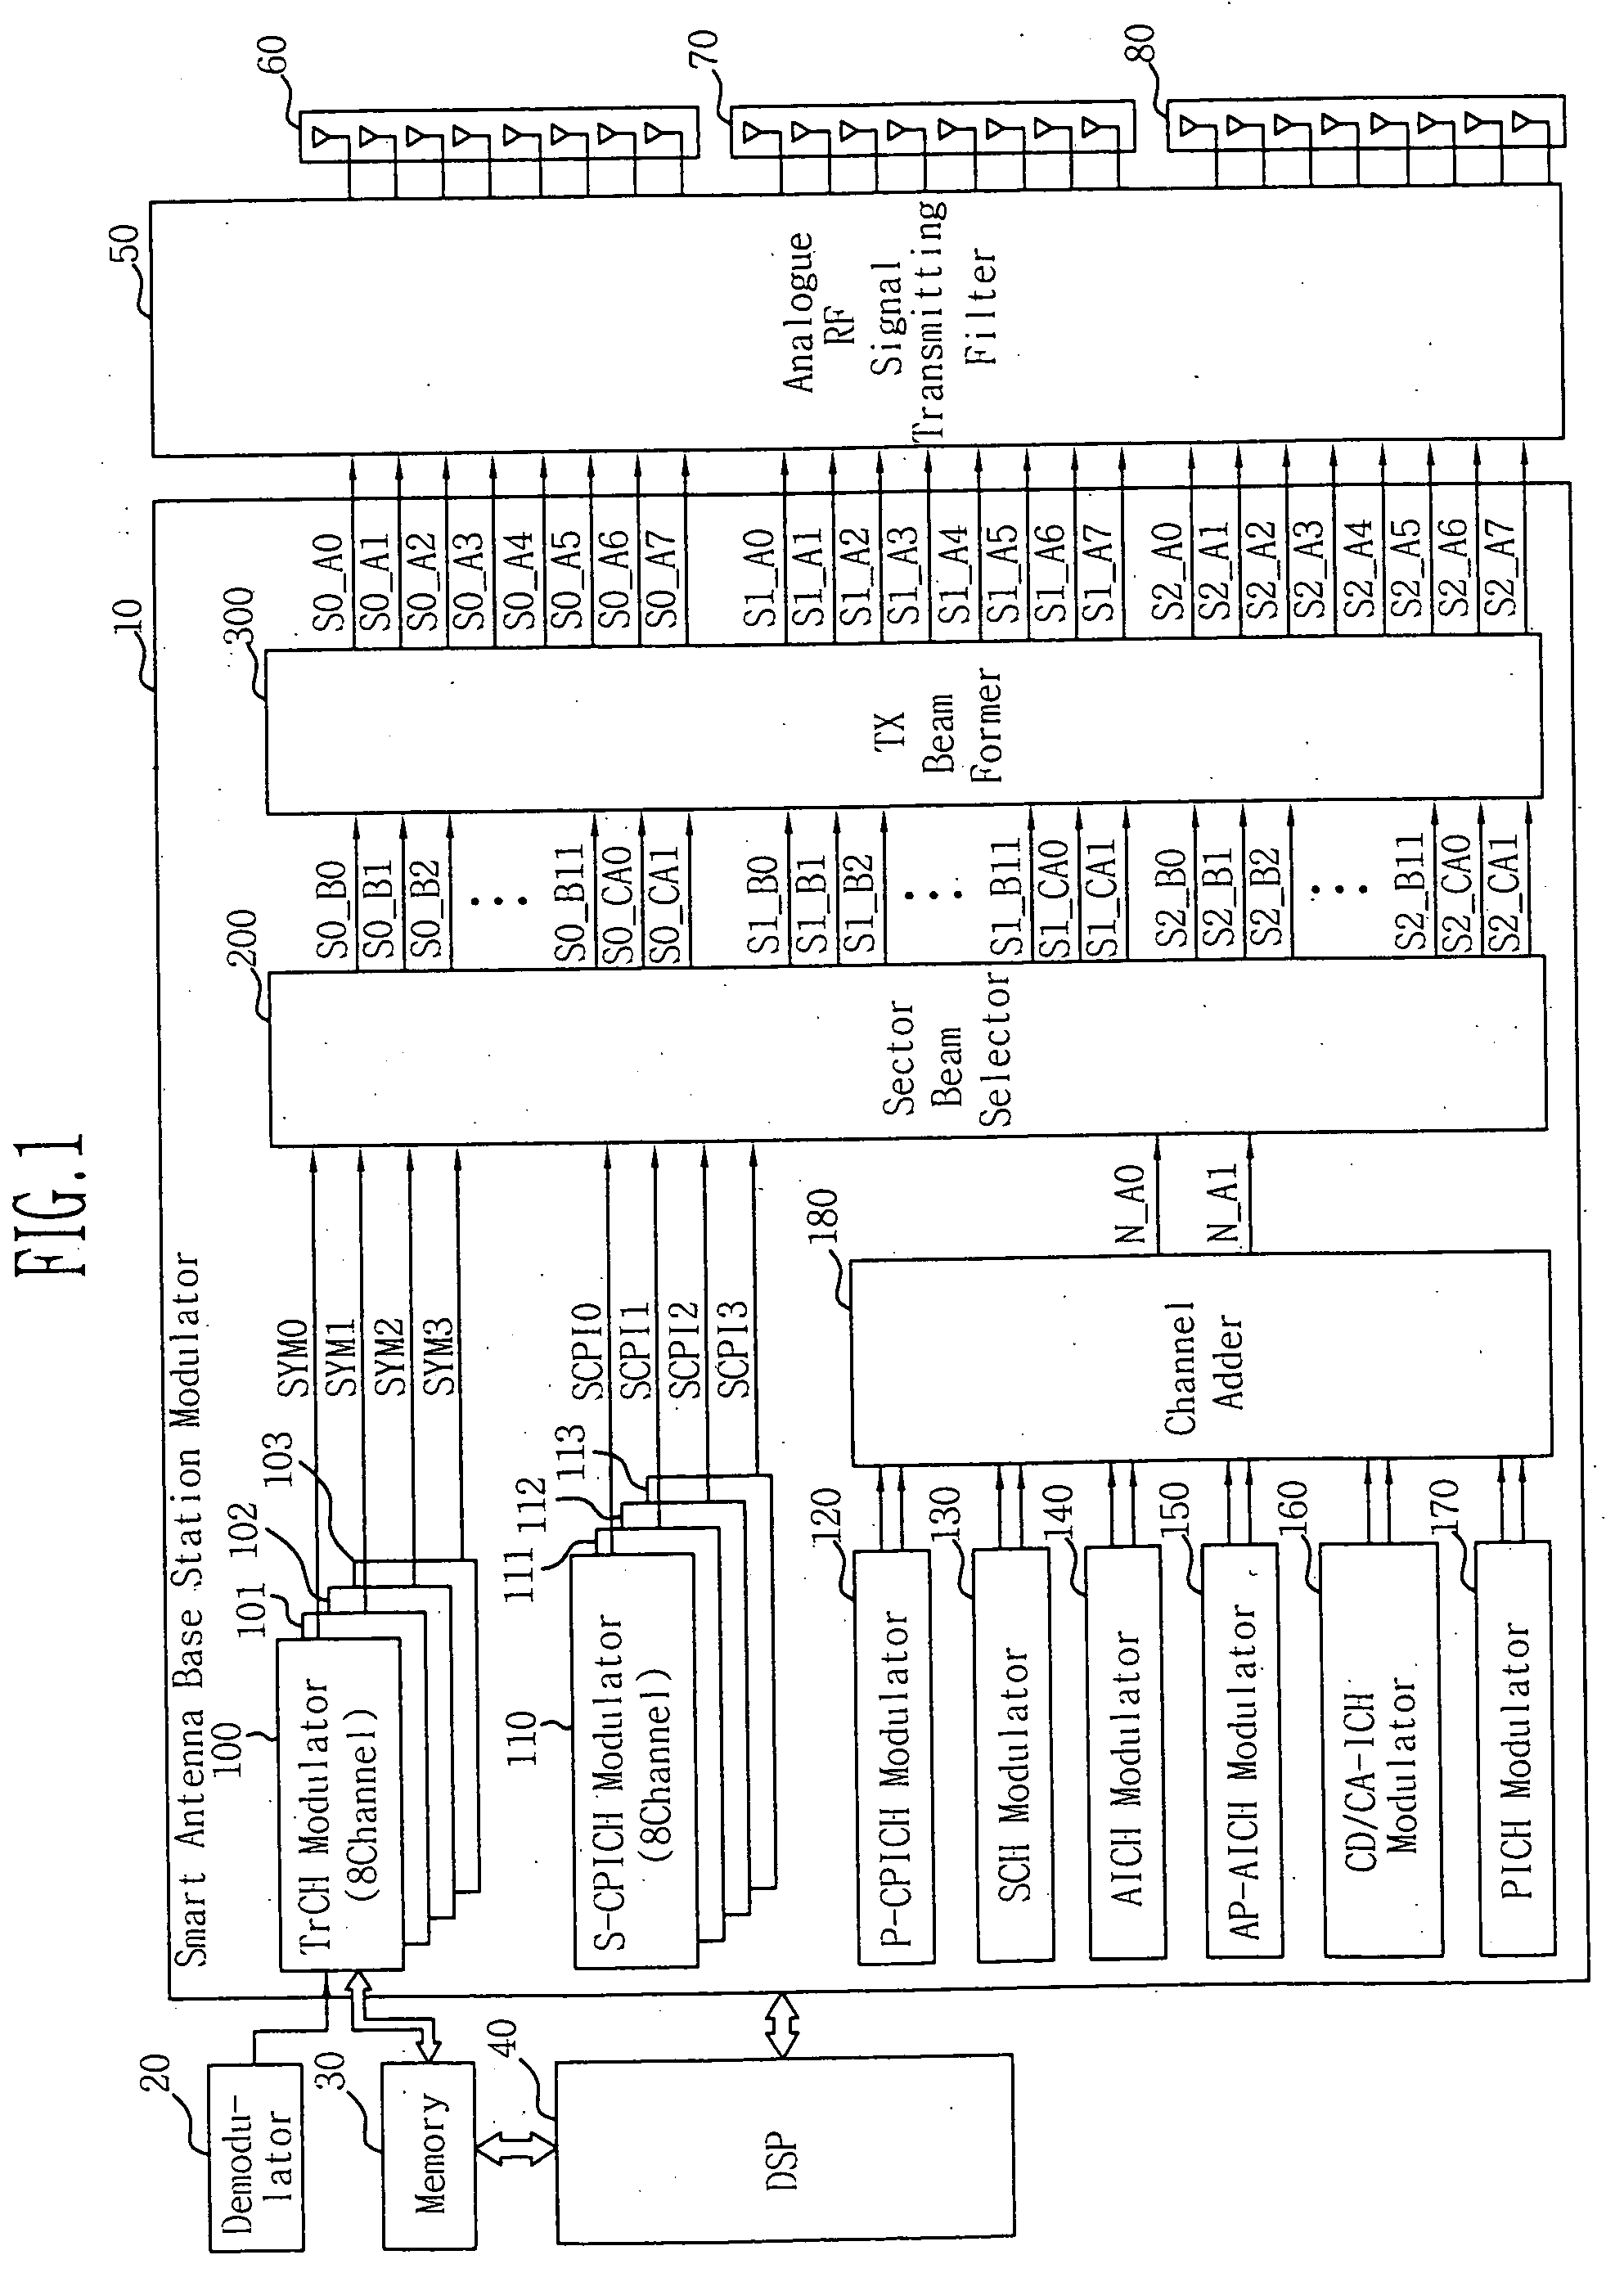 Apparatus for modulation in base station with smart antenna